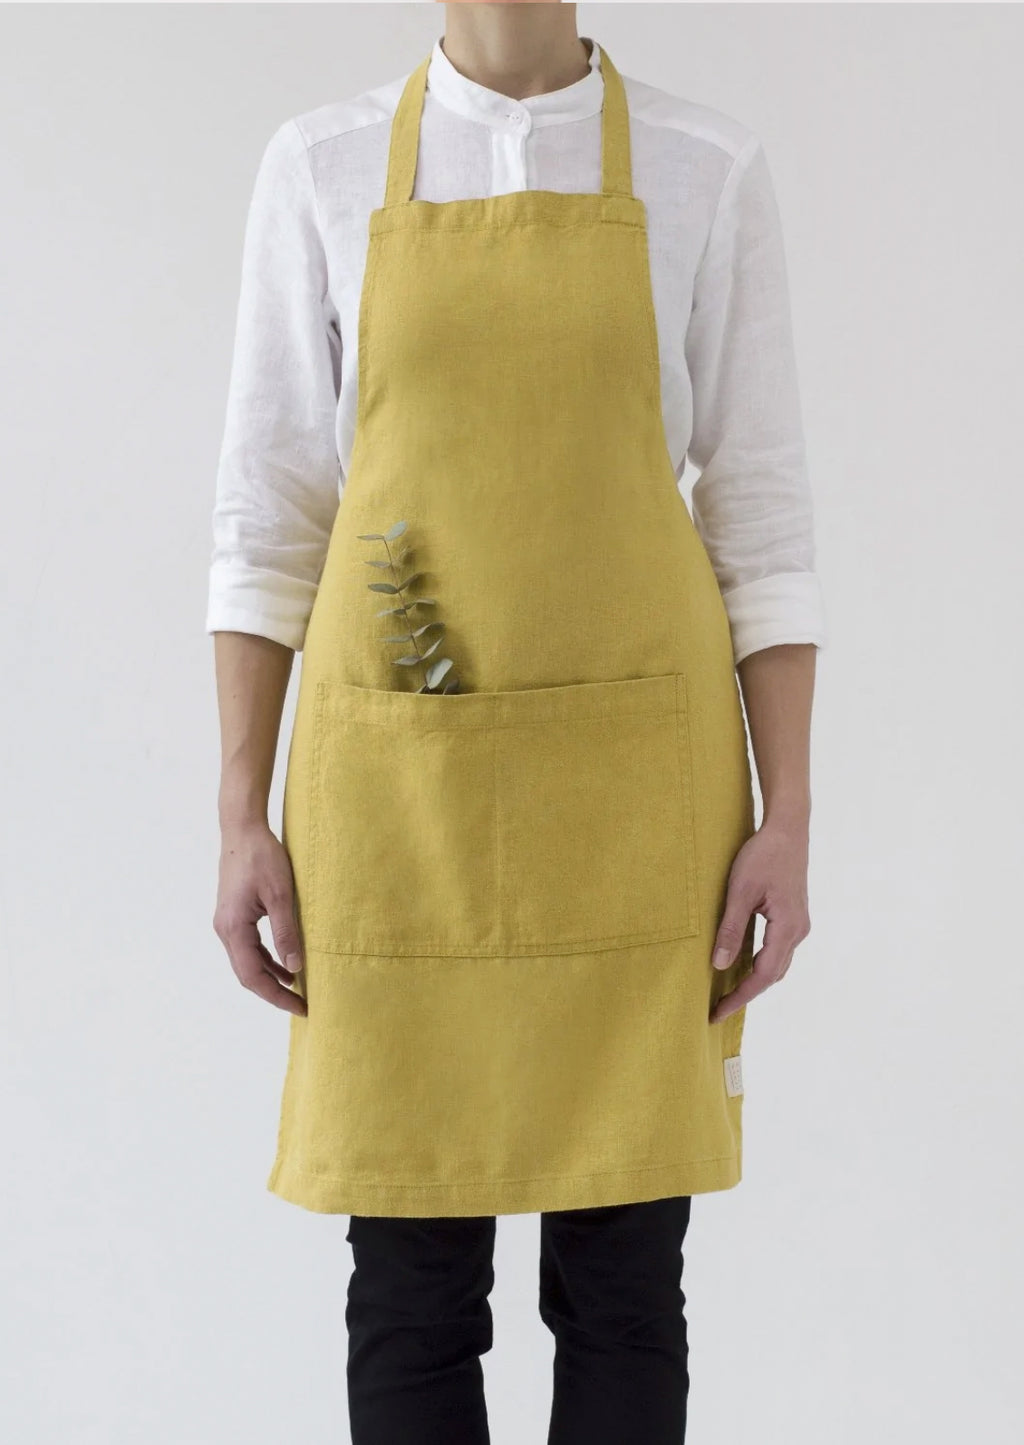 Chartreuse: A women wearing a linen apron in chartreuse color.